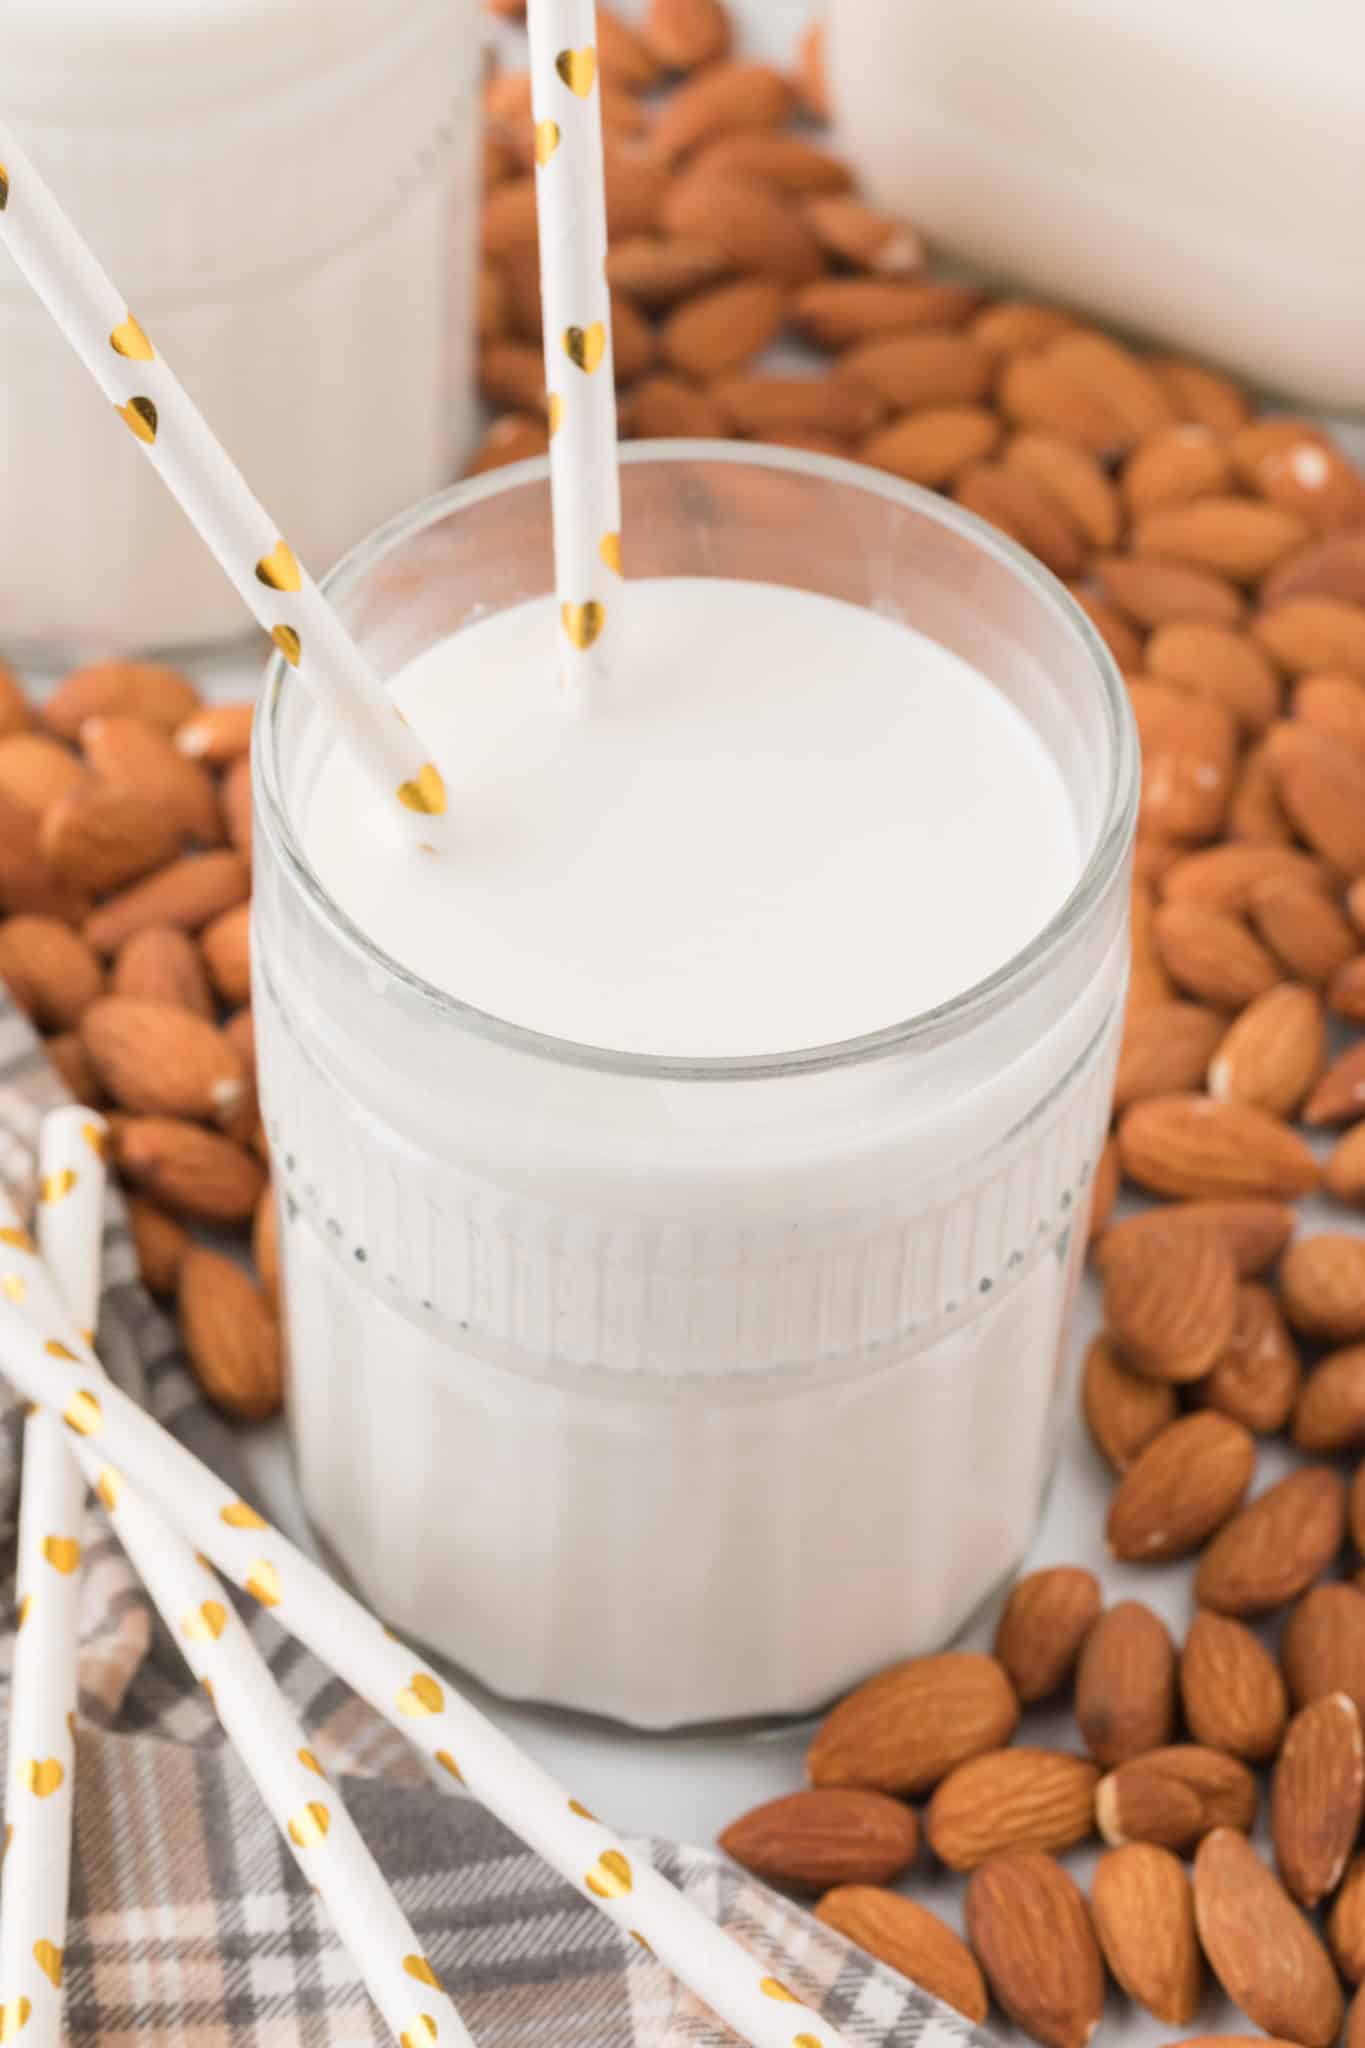 almond milk on a table in glass surrounded by almonds.